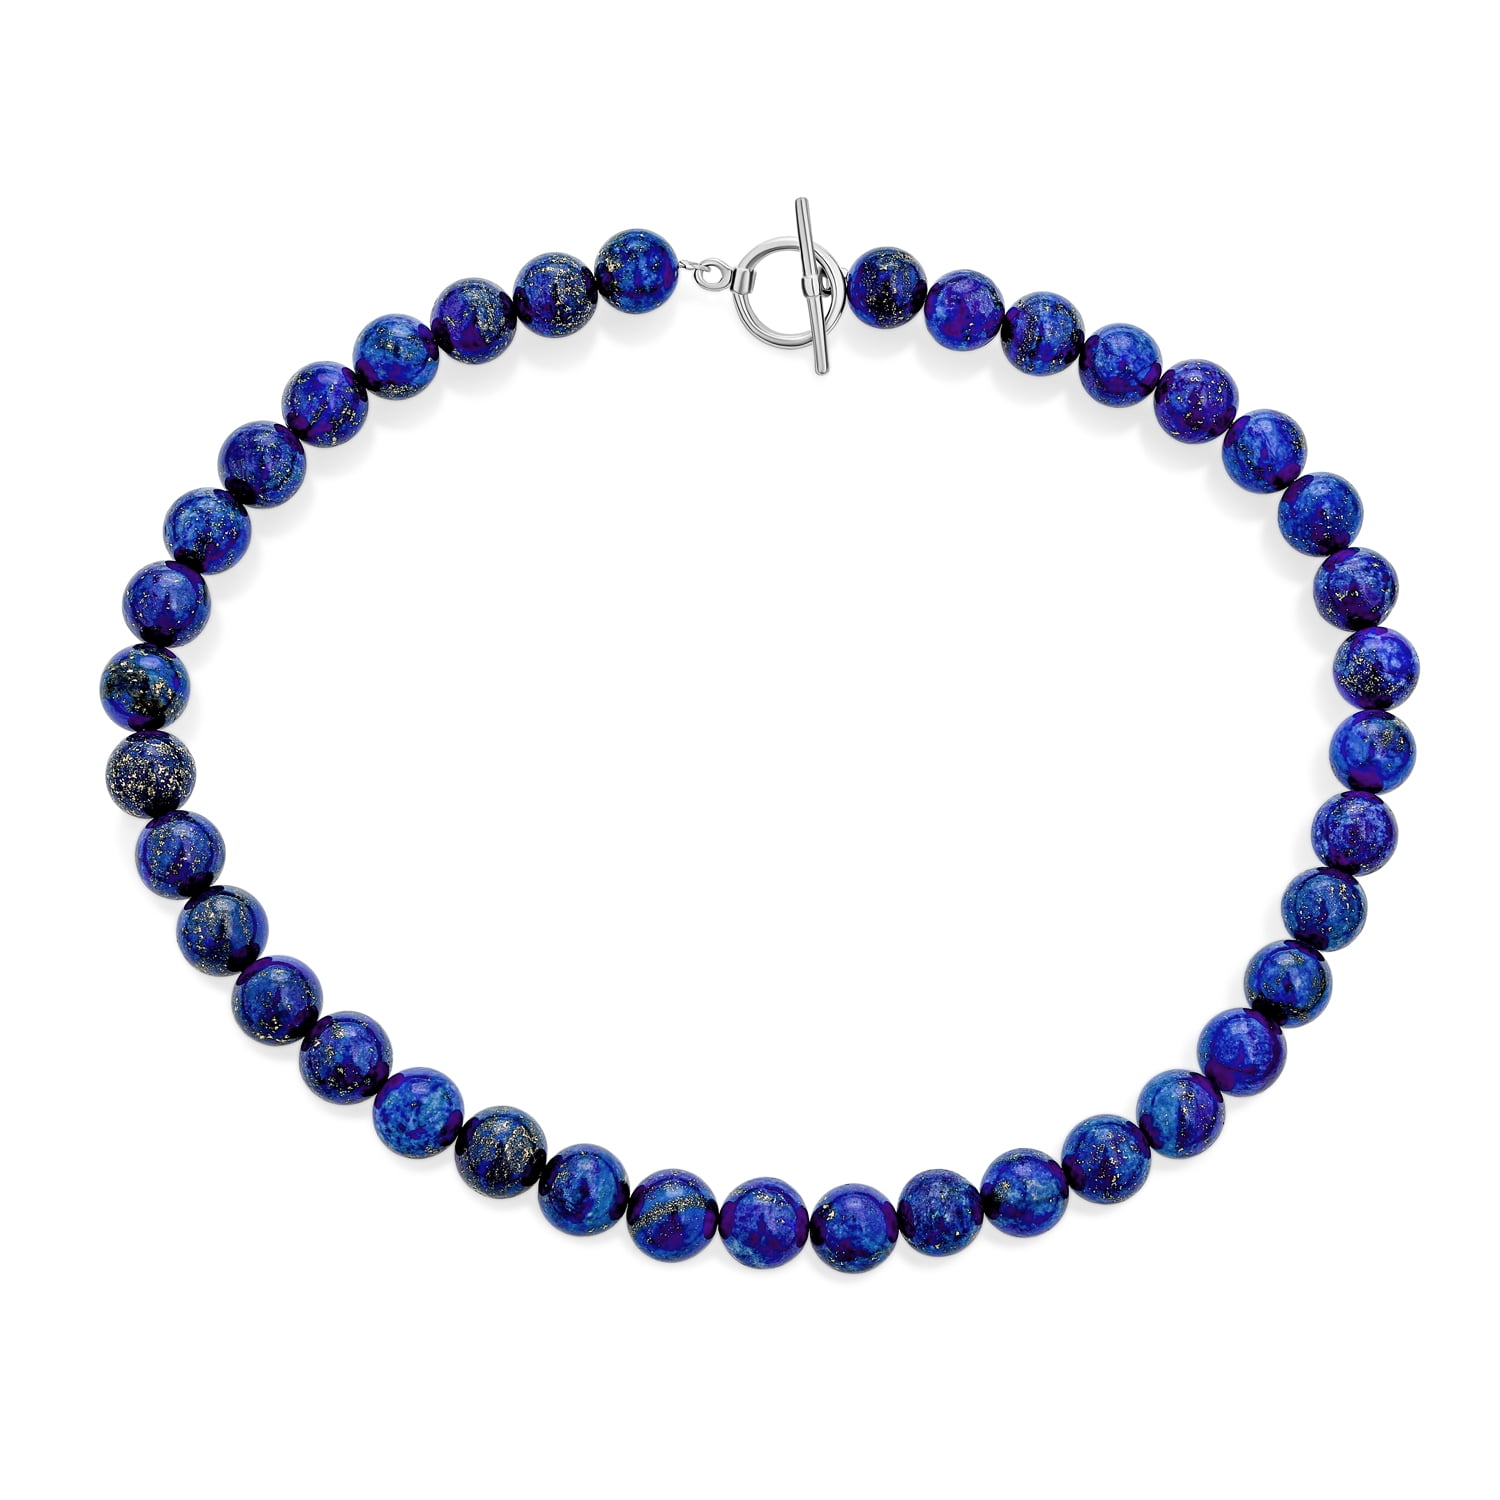 Large Round Lapis Bead Statement Necklace Gift for her Handmade Natural Lapis Round Lapis Lazuli Bead Necklace Sterling Silver Adjustable